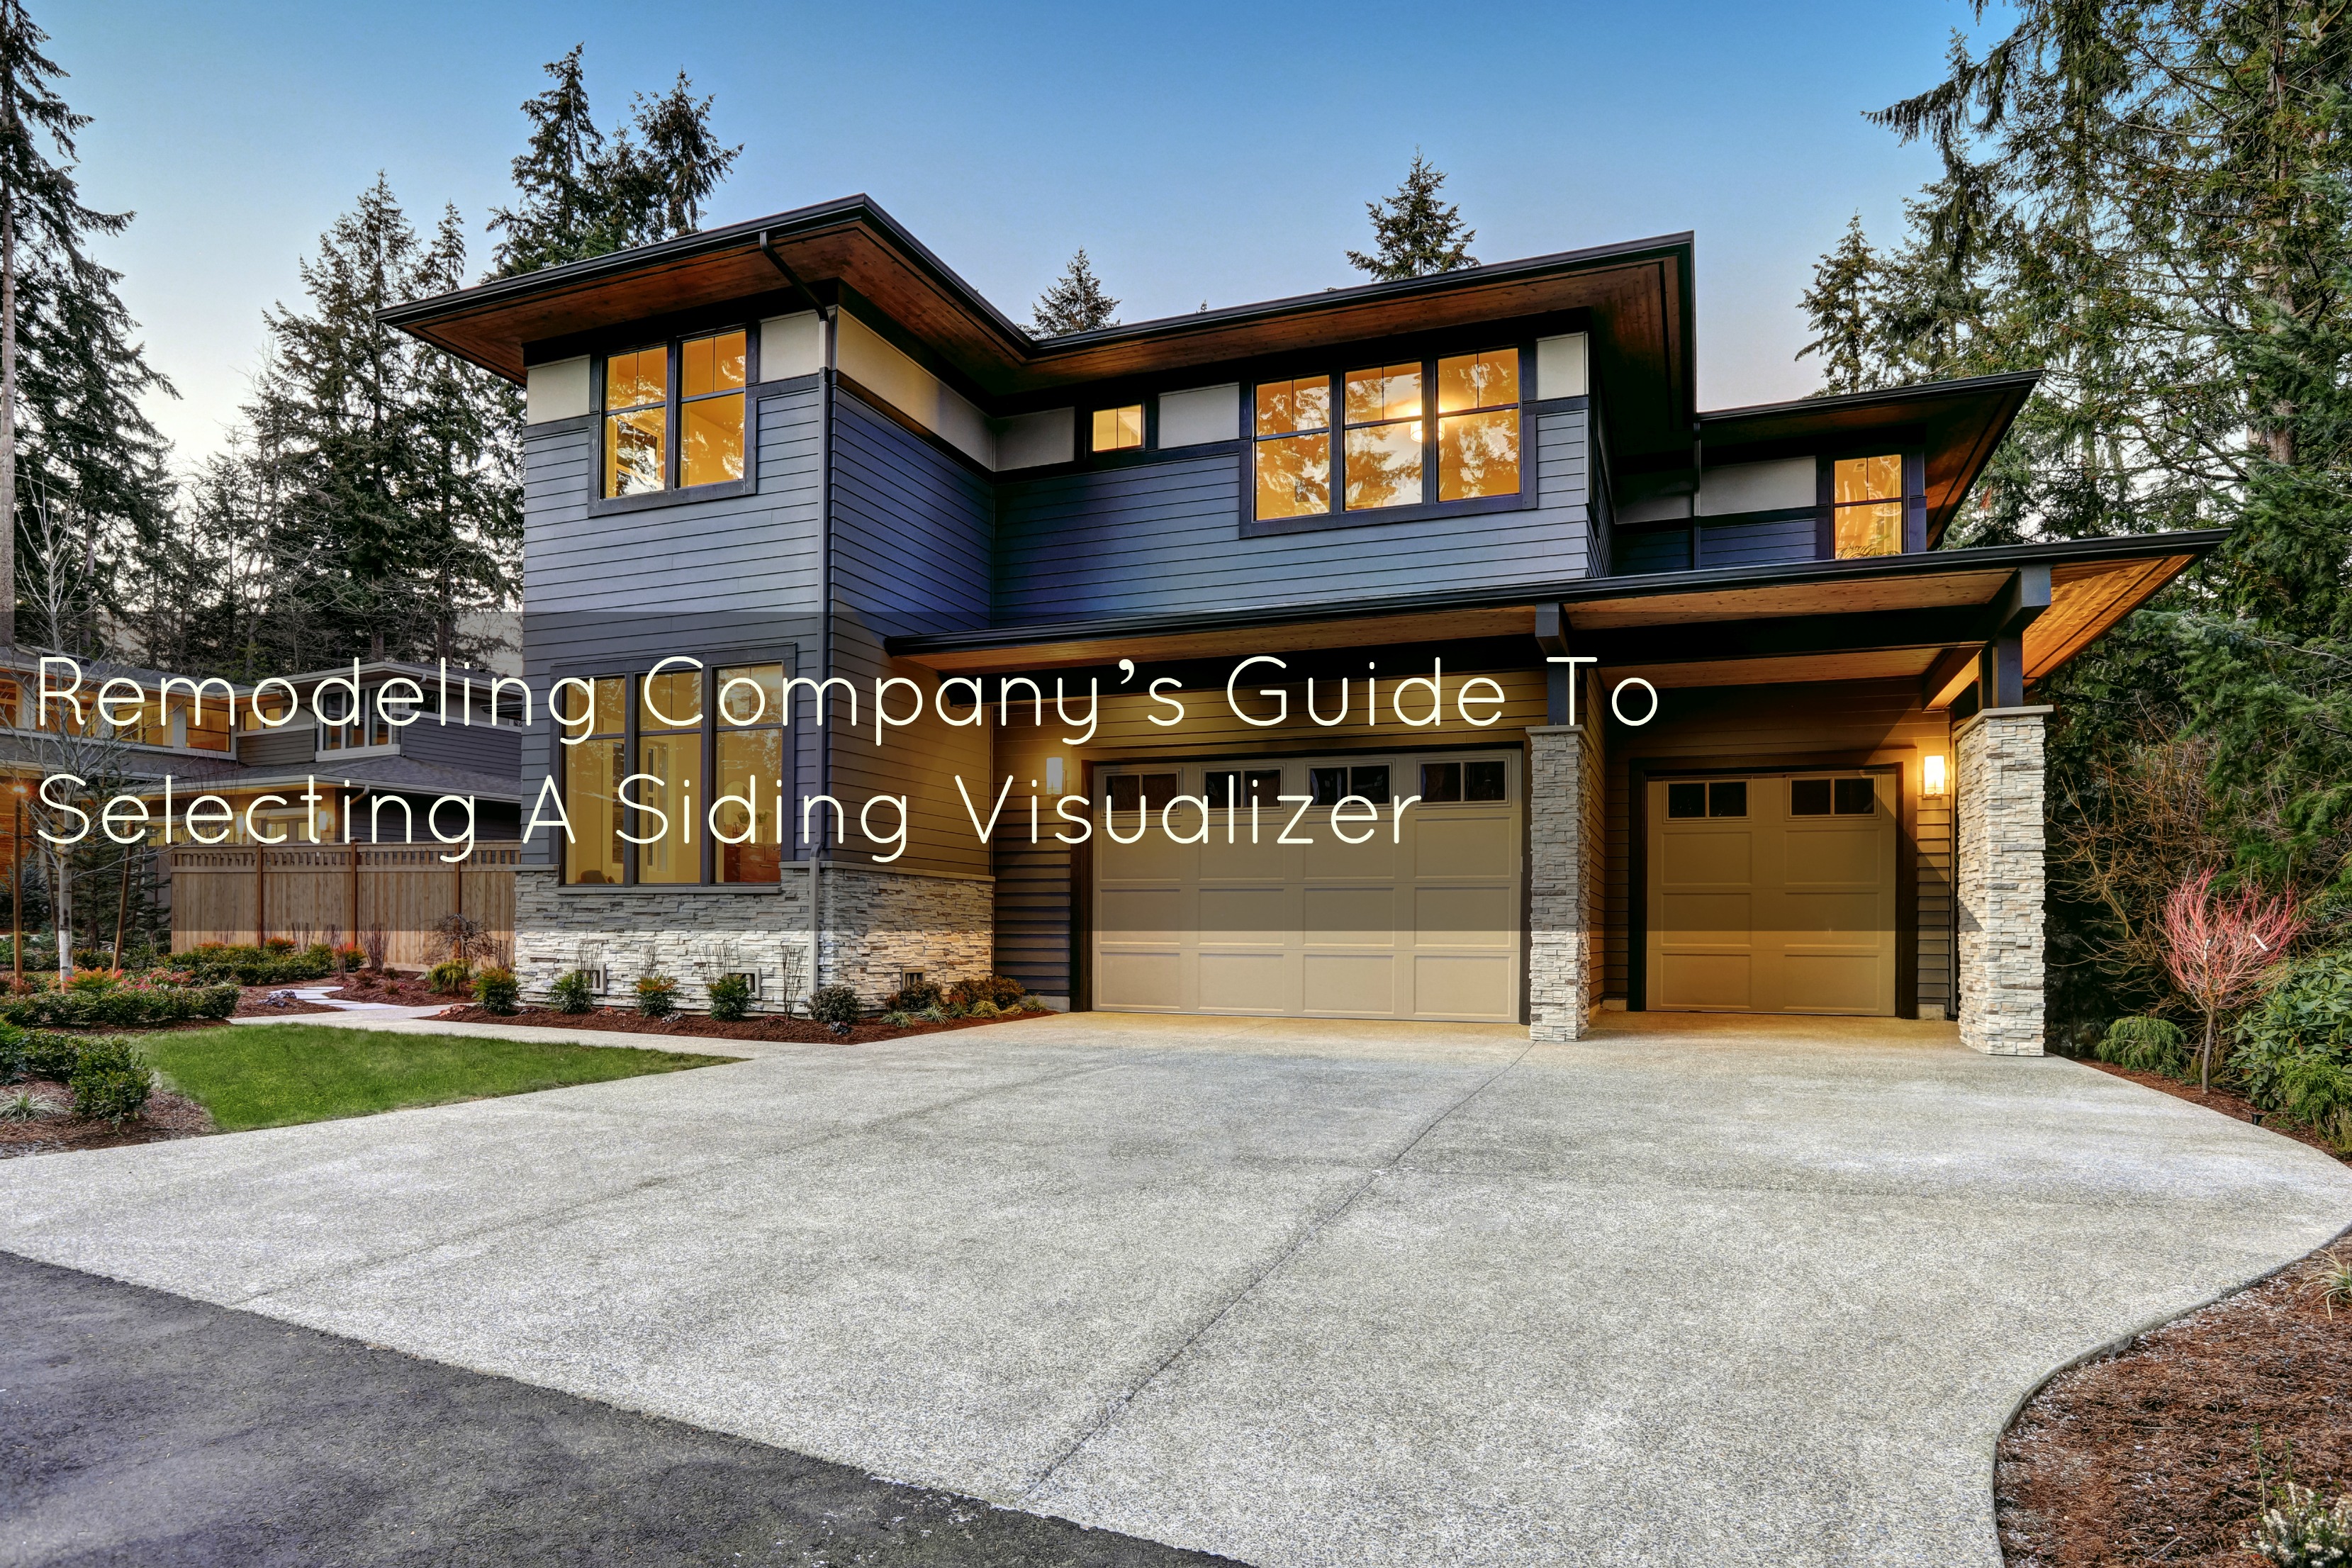 Remodeling Company’s Guide To Selecting A Siding Visualizer